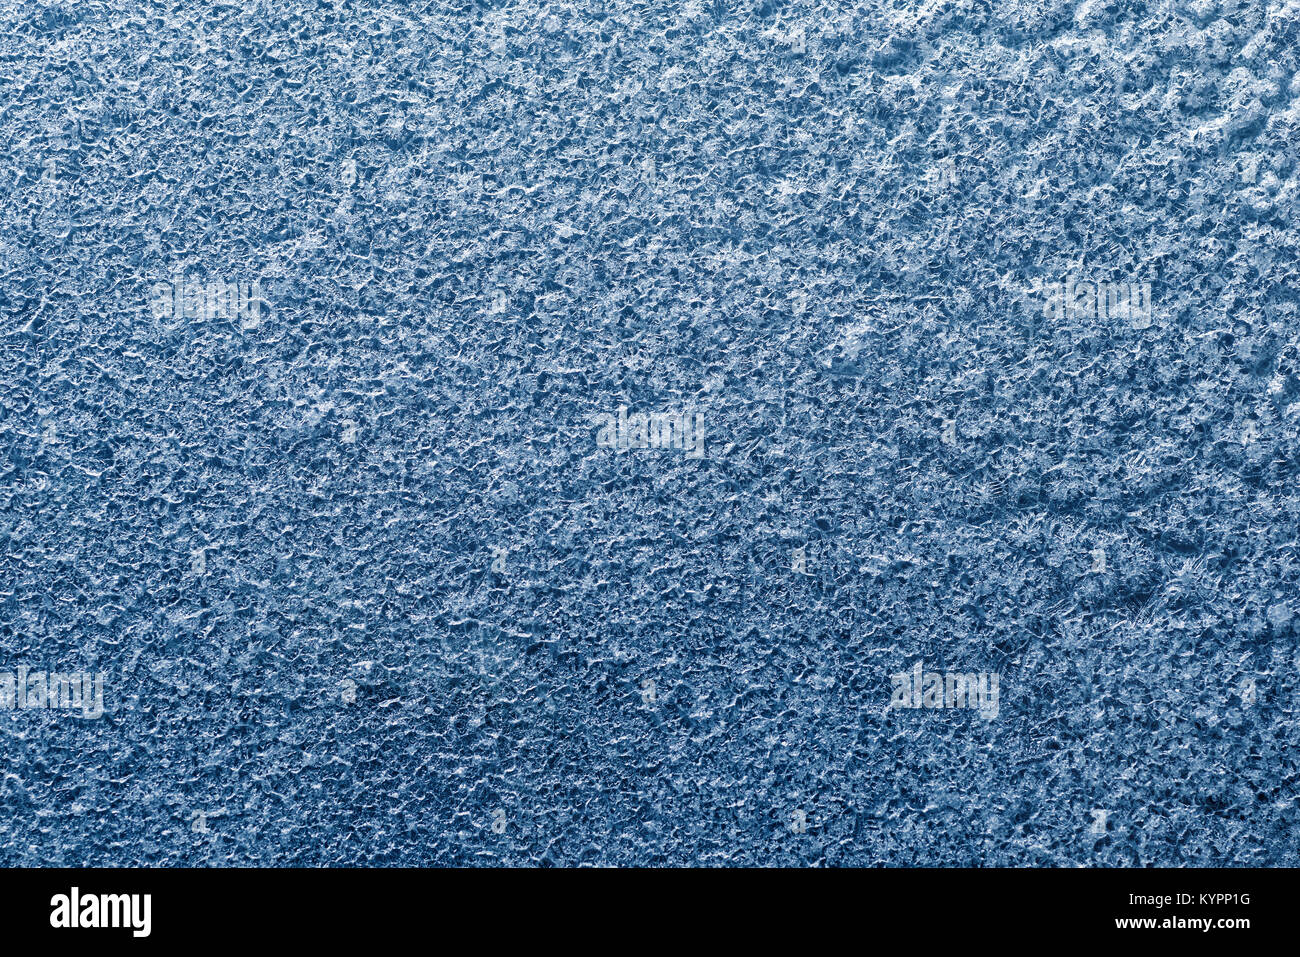 Textures and backgrounds: abstract winter pattern, seasonal background. Flat surface, covered with ice-like crystals of dried salt. Stock Photo